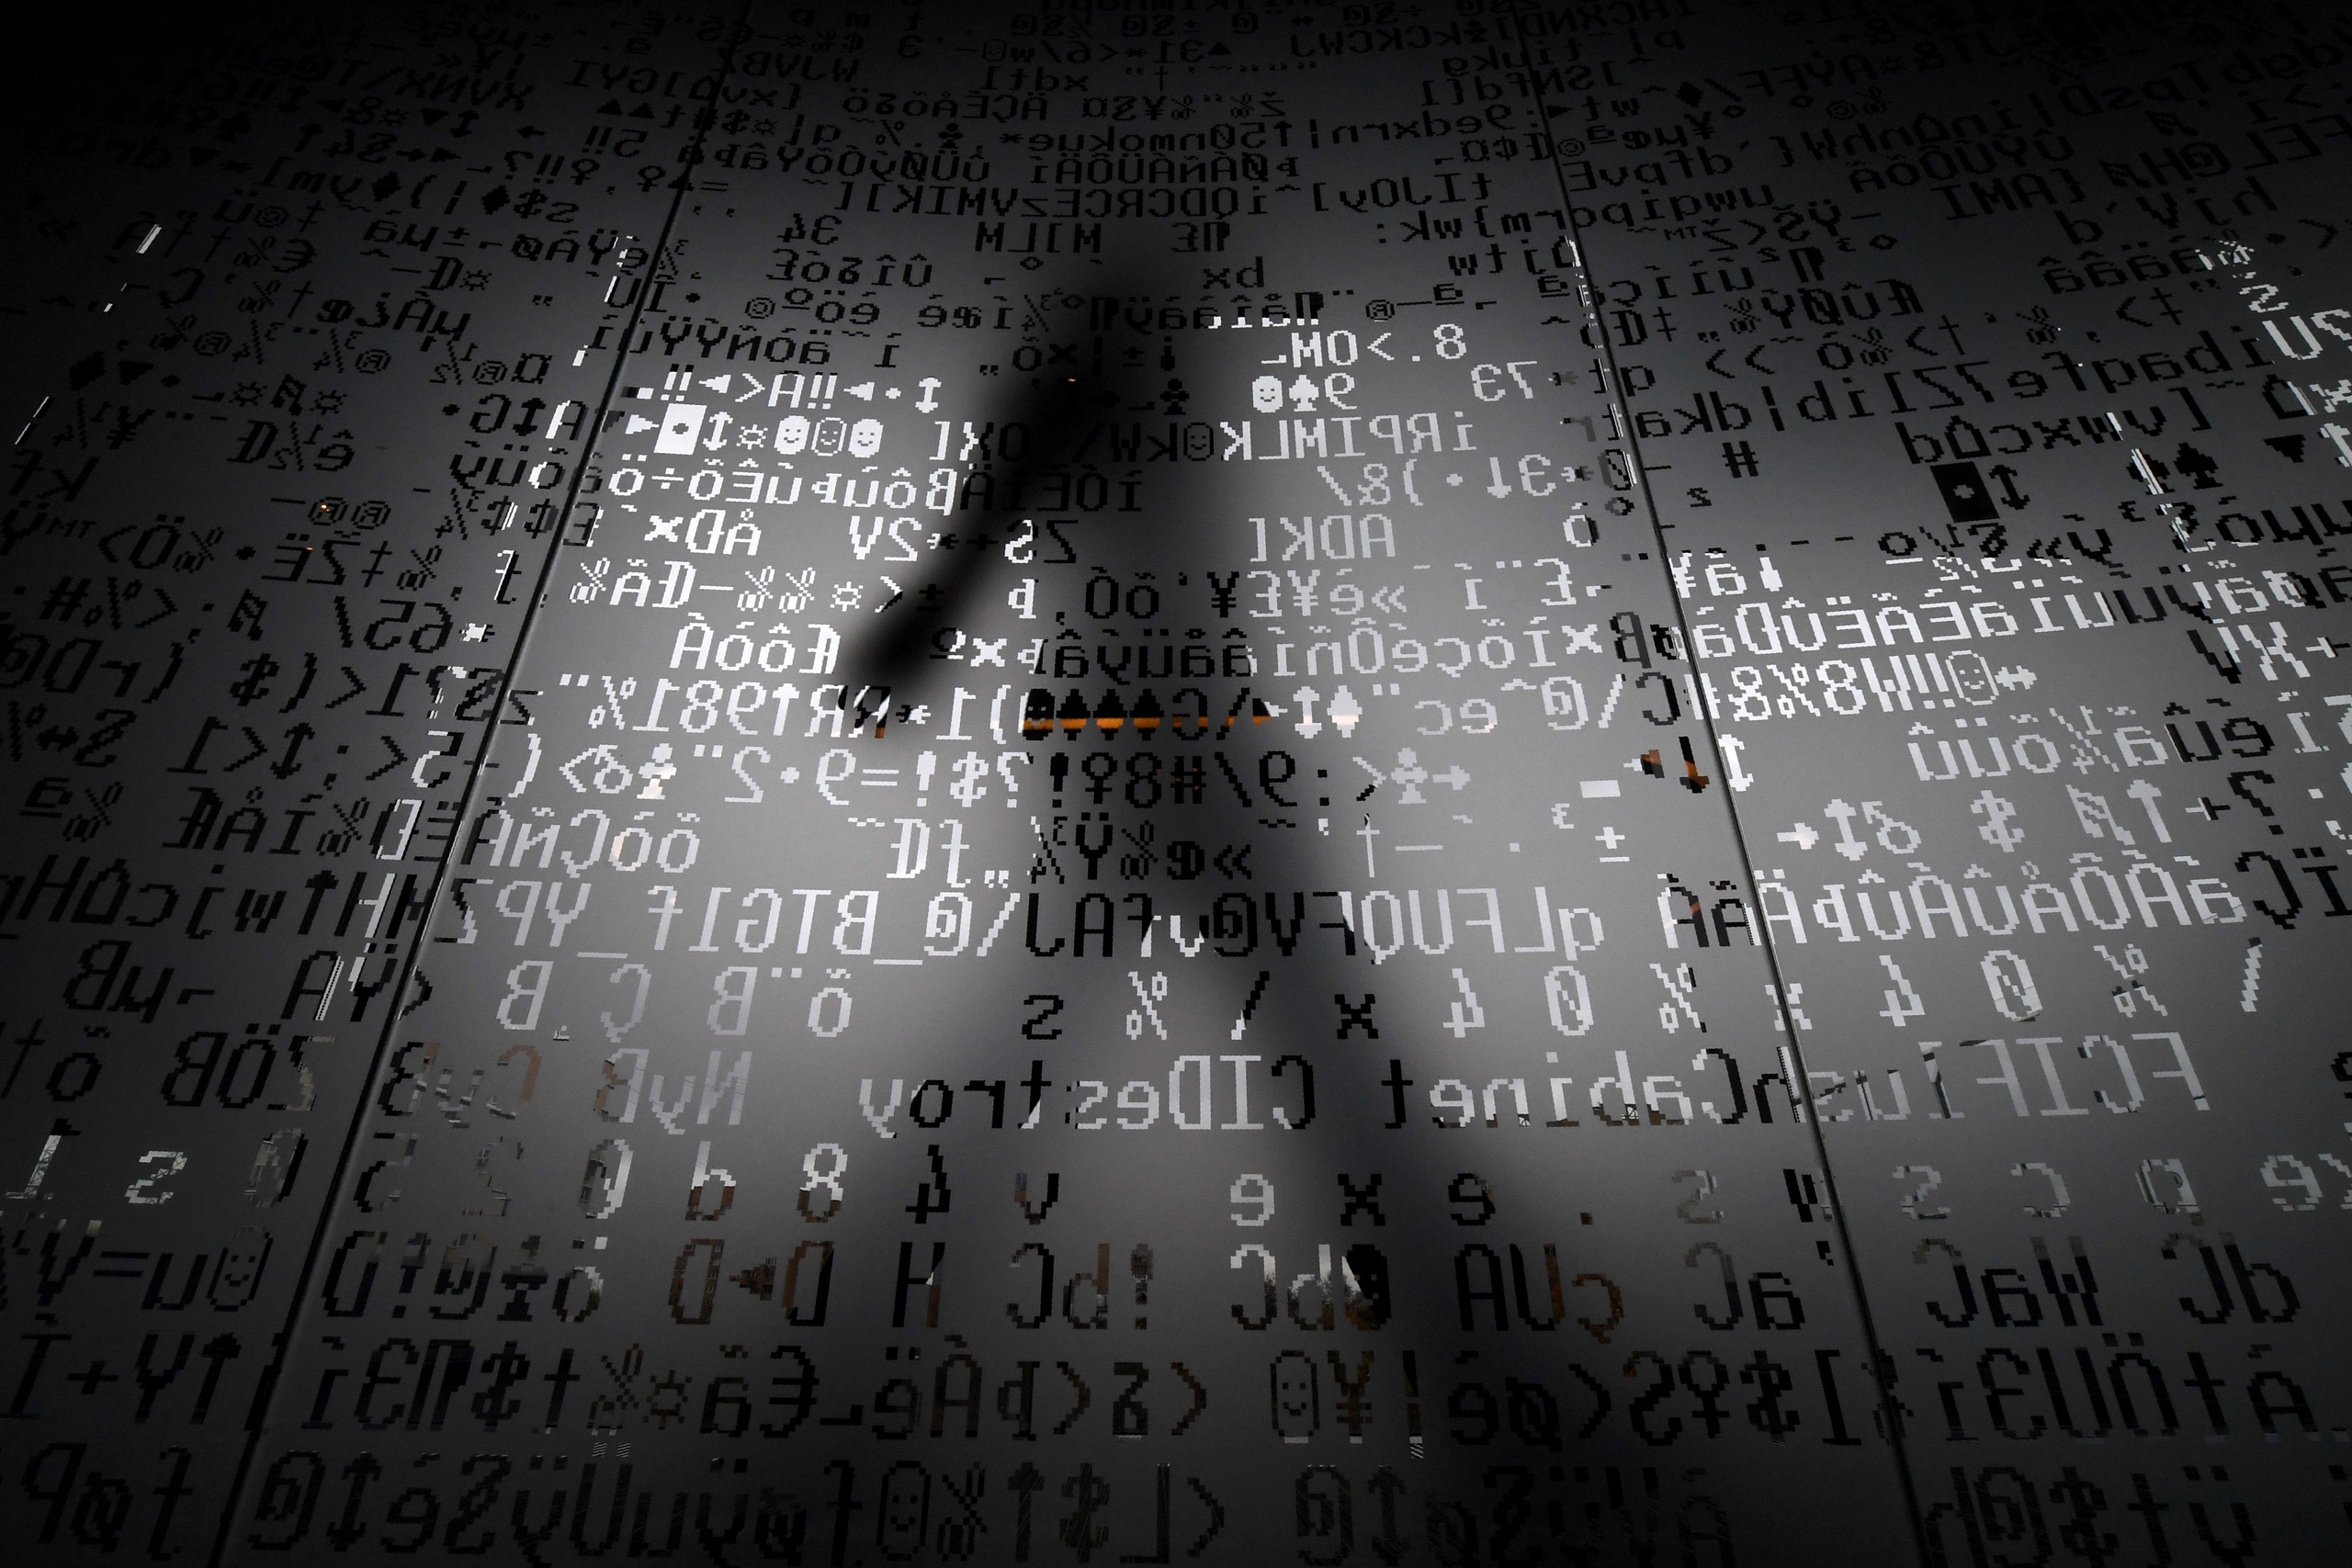 An employee walks behind a glass wall with machine coding symbols at the headquarters of Internet security giant Kaspersky in Moscow on Oct 17, 2016. (Kirill Kudryavtsev—AFP/Getty Images)